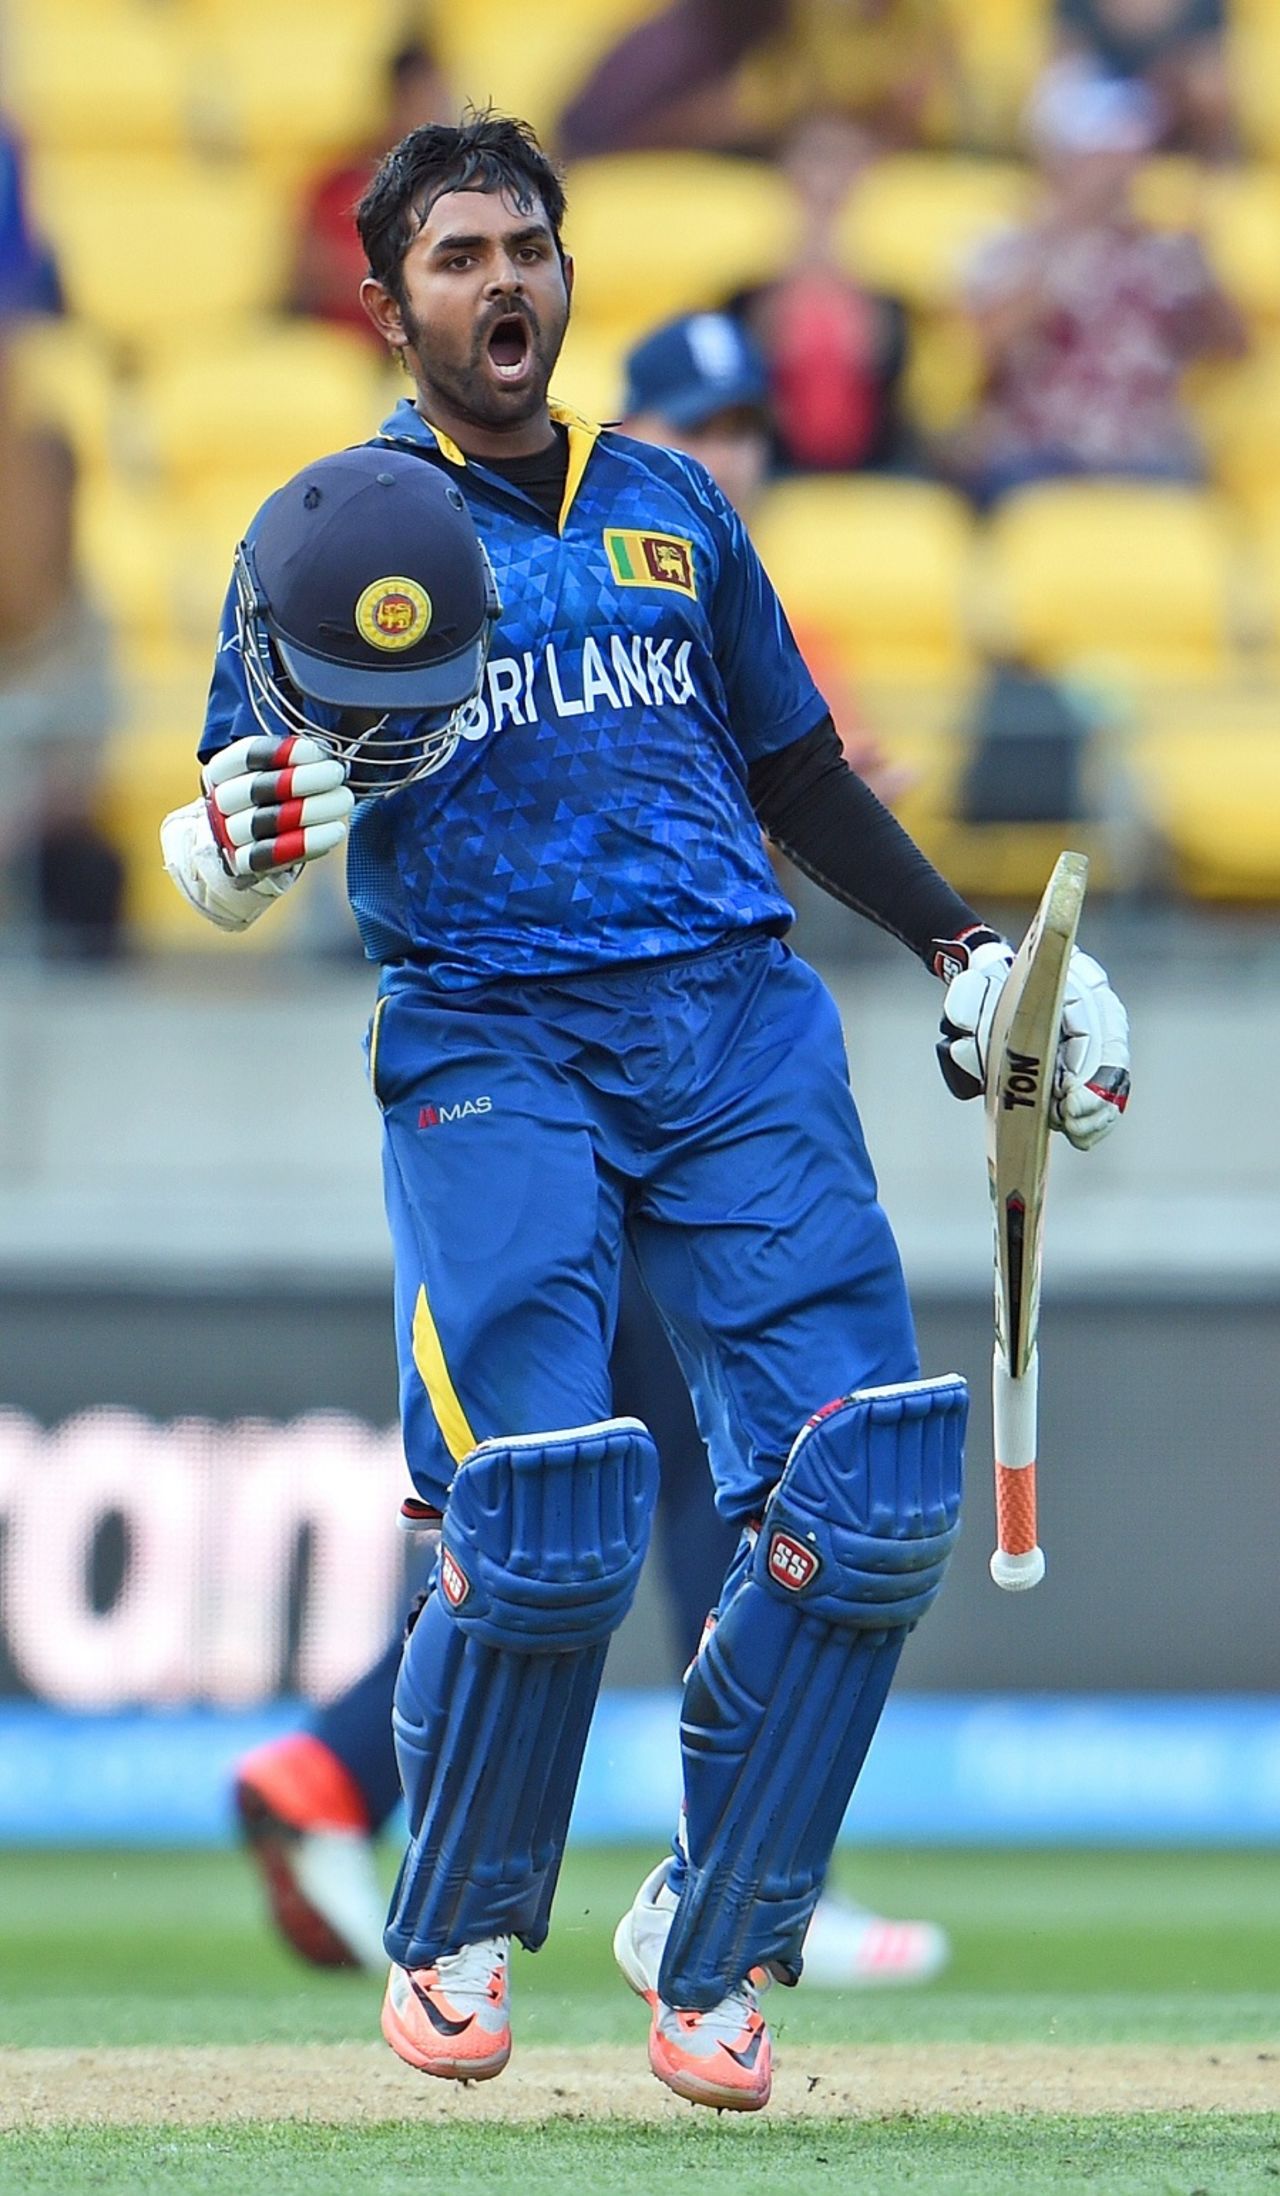 Lahiru Thirimanne roars after becoming the youngest Sri Lankan to score a World Cup century, England v Sri Lanka, World Cup 2015, Group A, Wellington, March 1, 2015